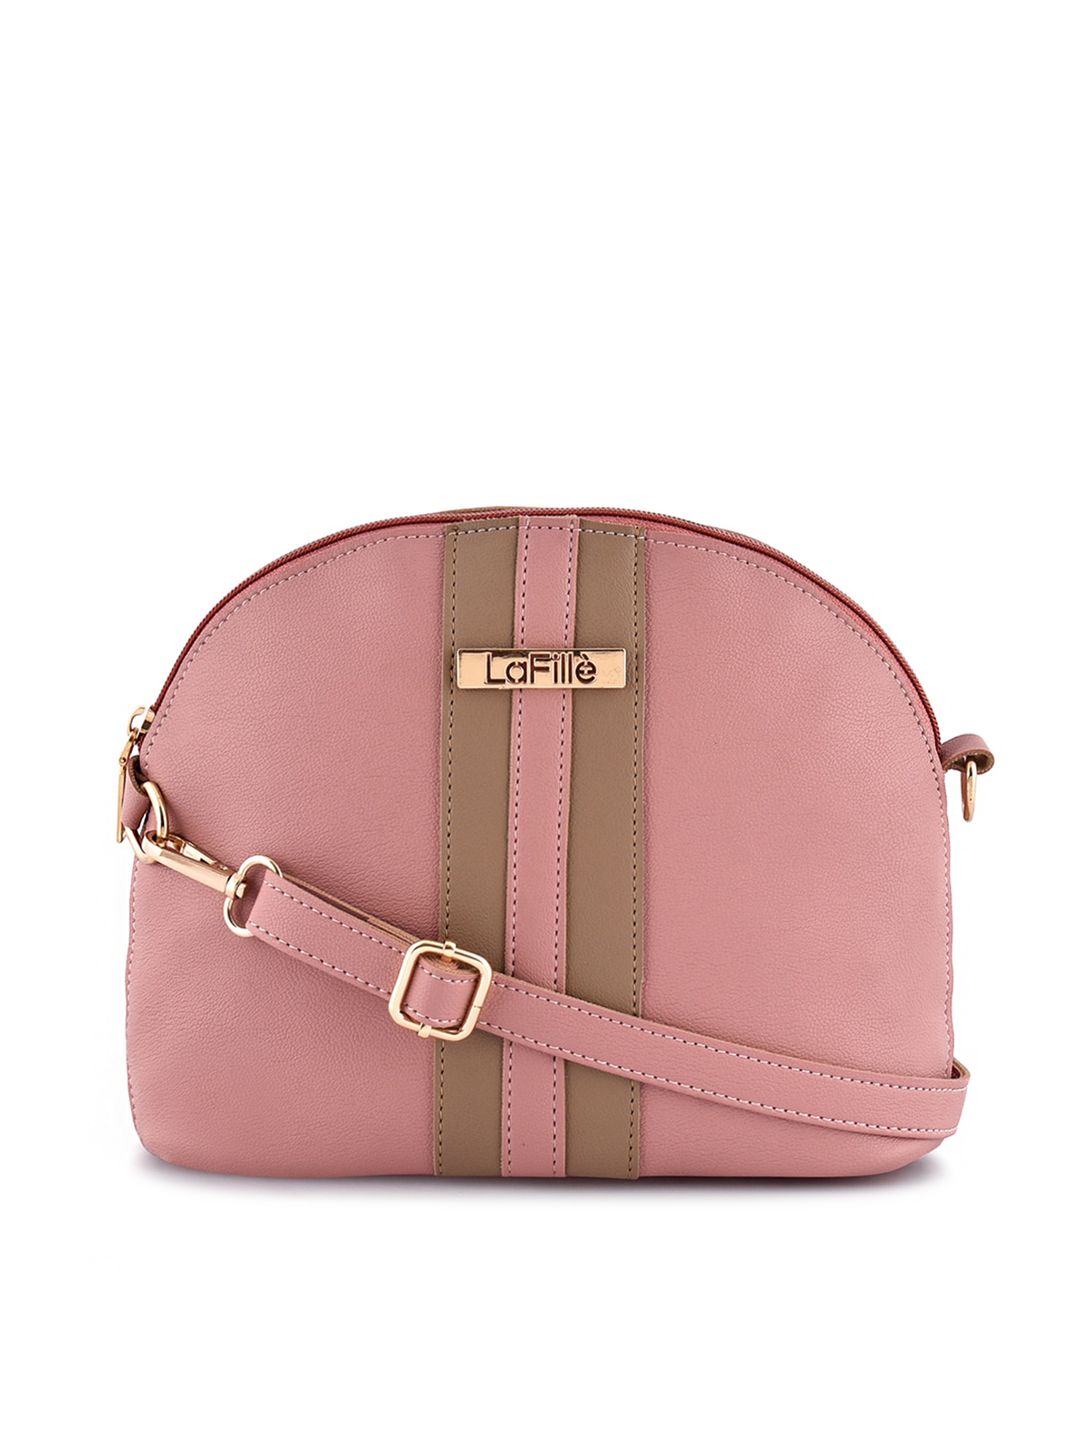 LaFille Peach-Coloured Striped PU Half Moon Sling Bag Price in India